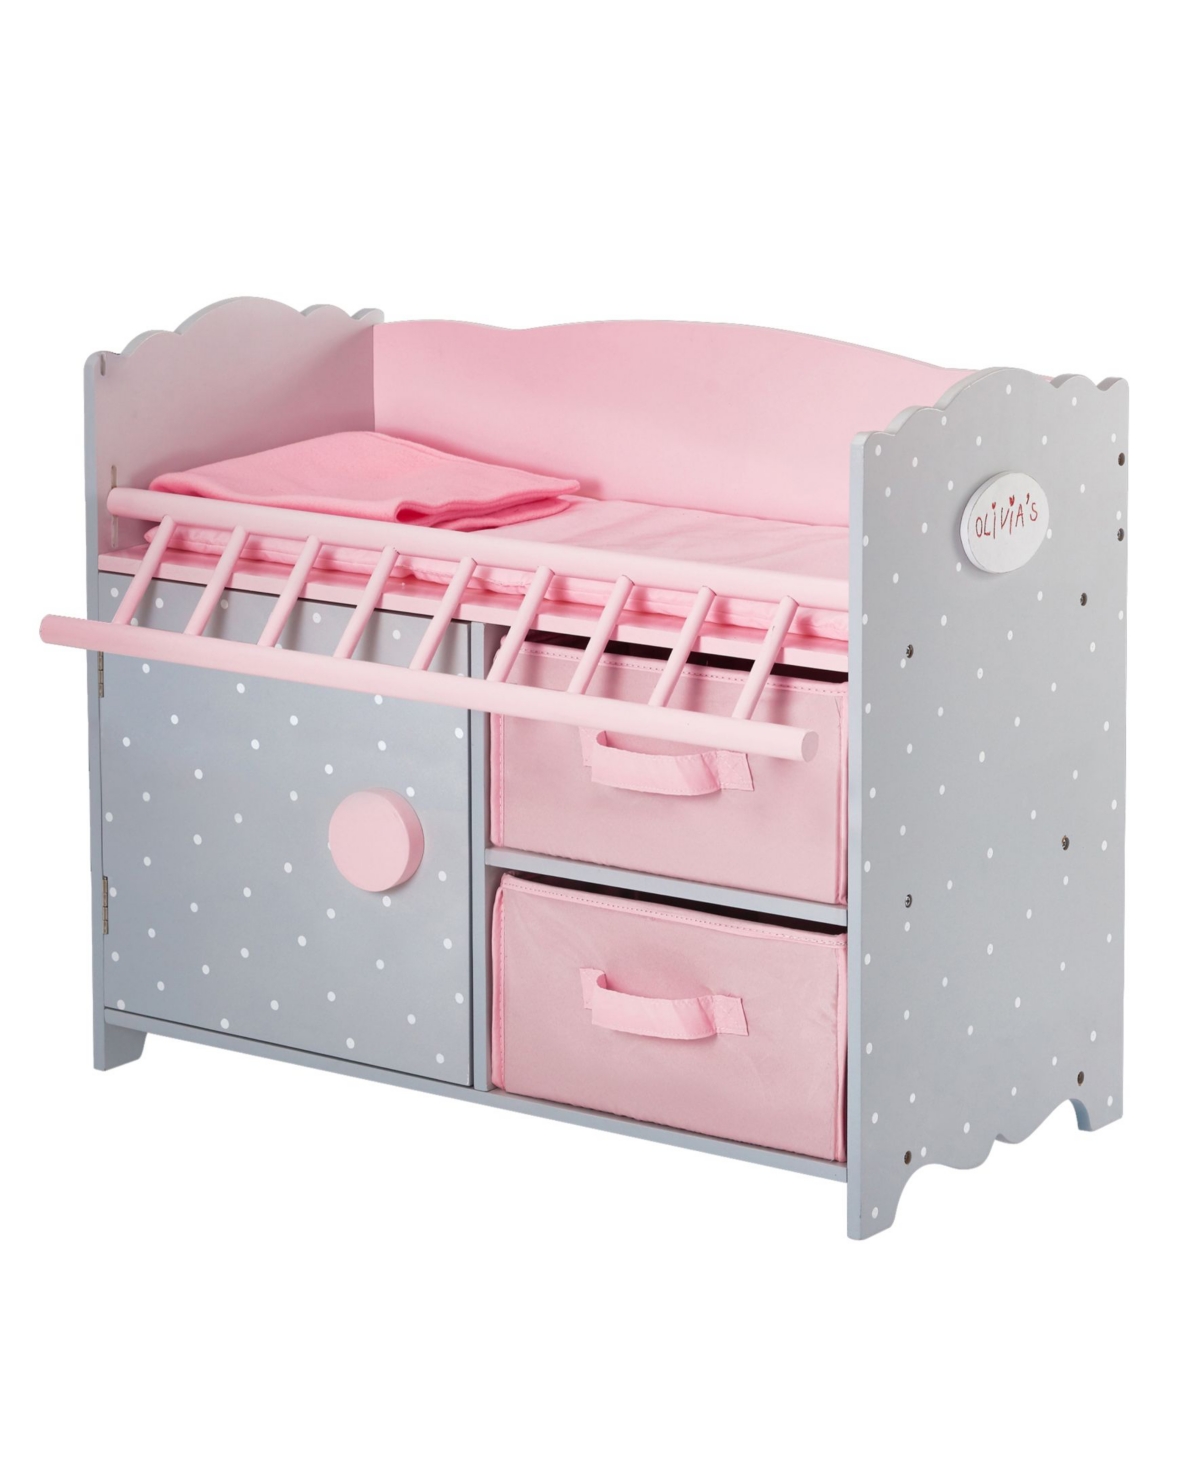 Redbox Kids' Olivia's Little World Polka Dots Princess Baby Doll Crib With Cabinet, Cubby In Grey